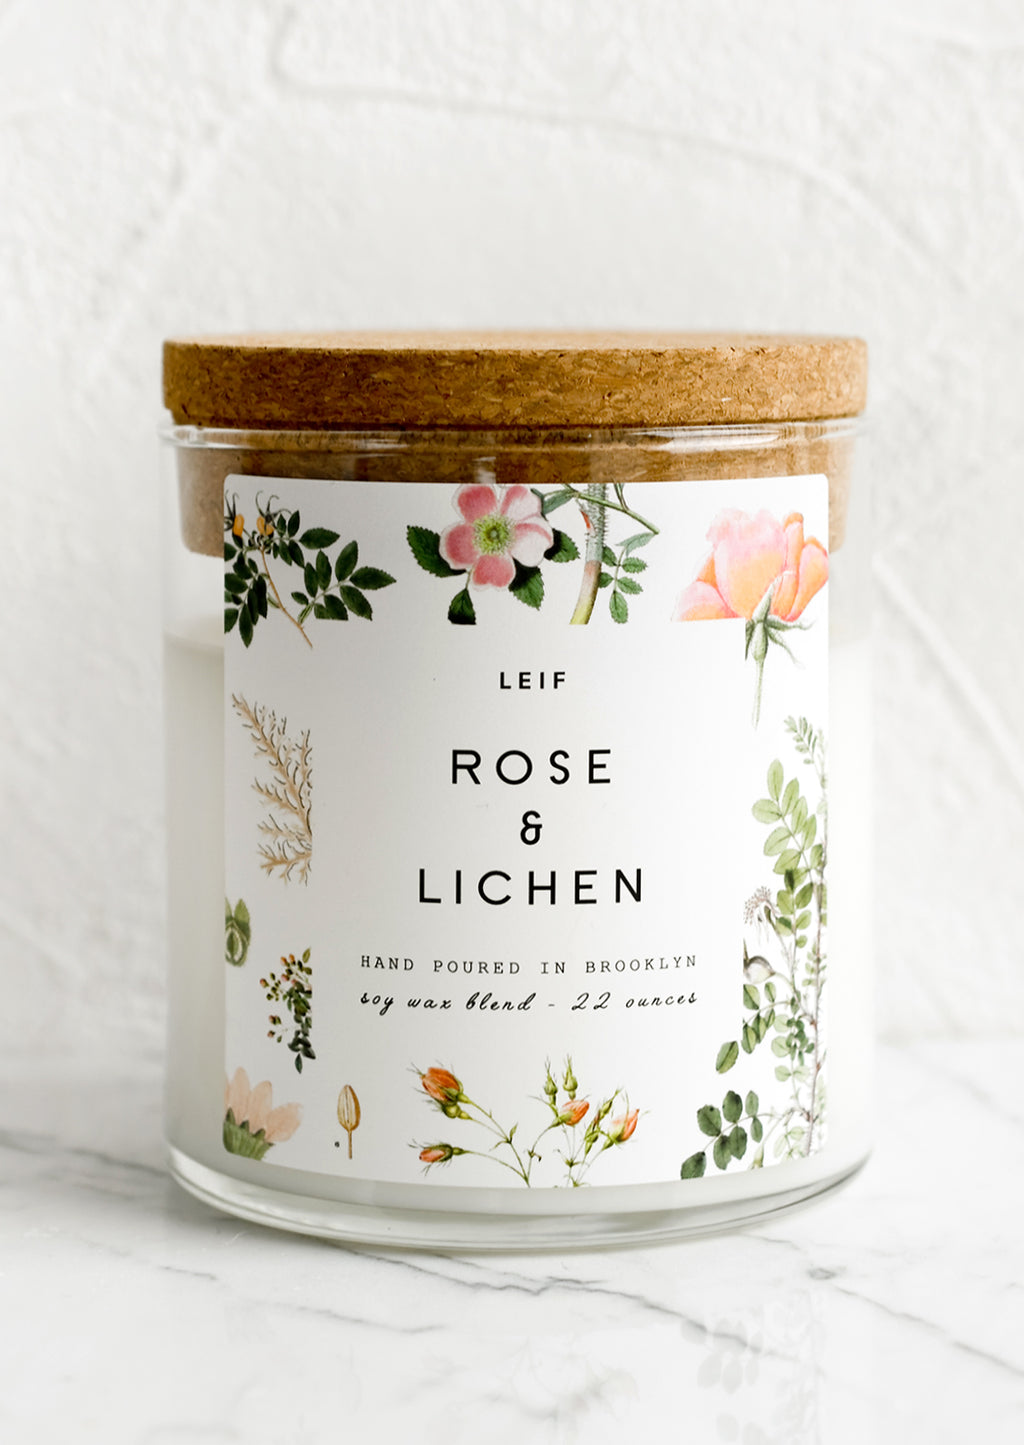 Rose & Lichen: A glass jar candle in Rose & Lichen scent with botanical print label.